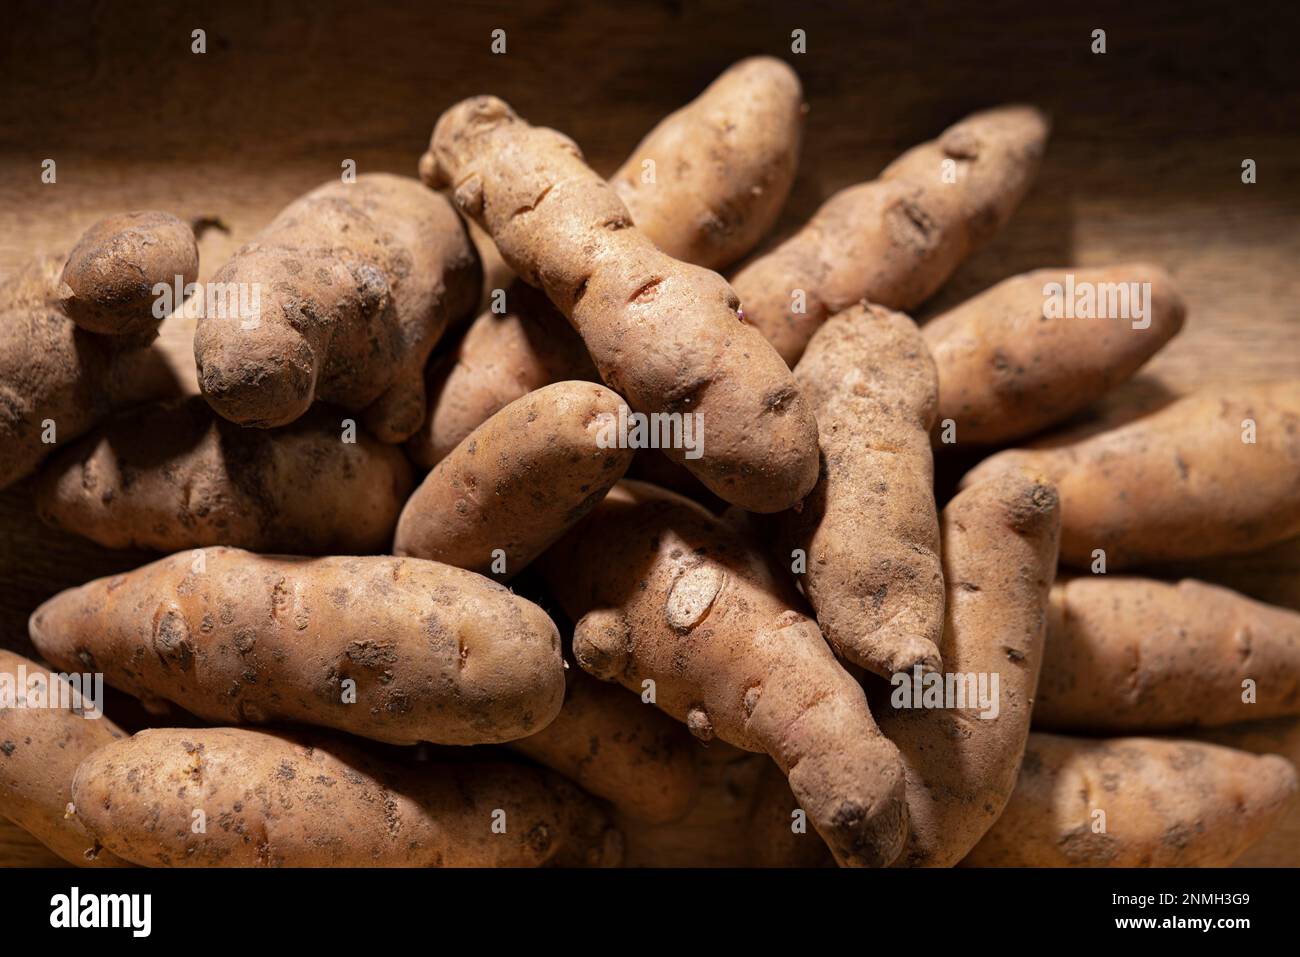 Bamberger Hoernla, also Bamberger Hoernchen, an old potato variety from Franconia, potato, food photography Stock Photo